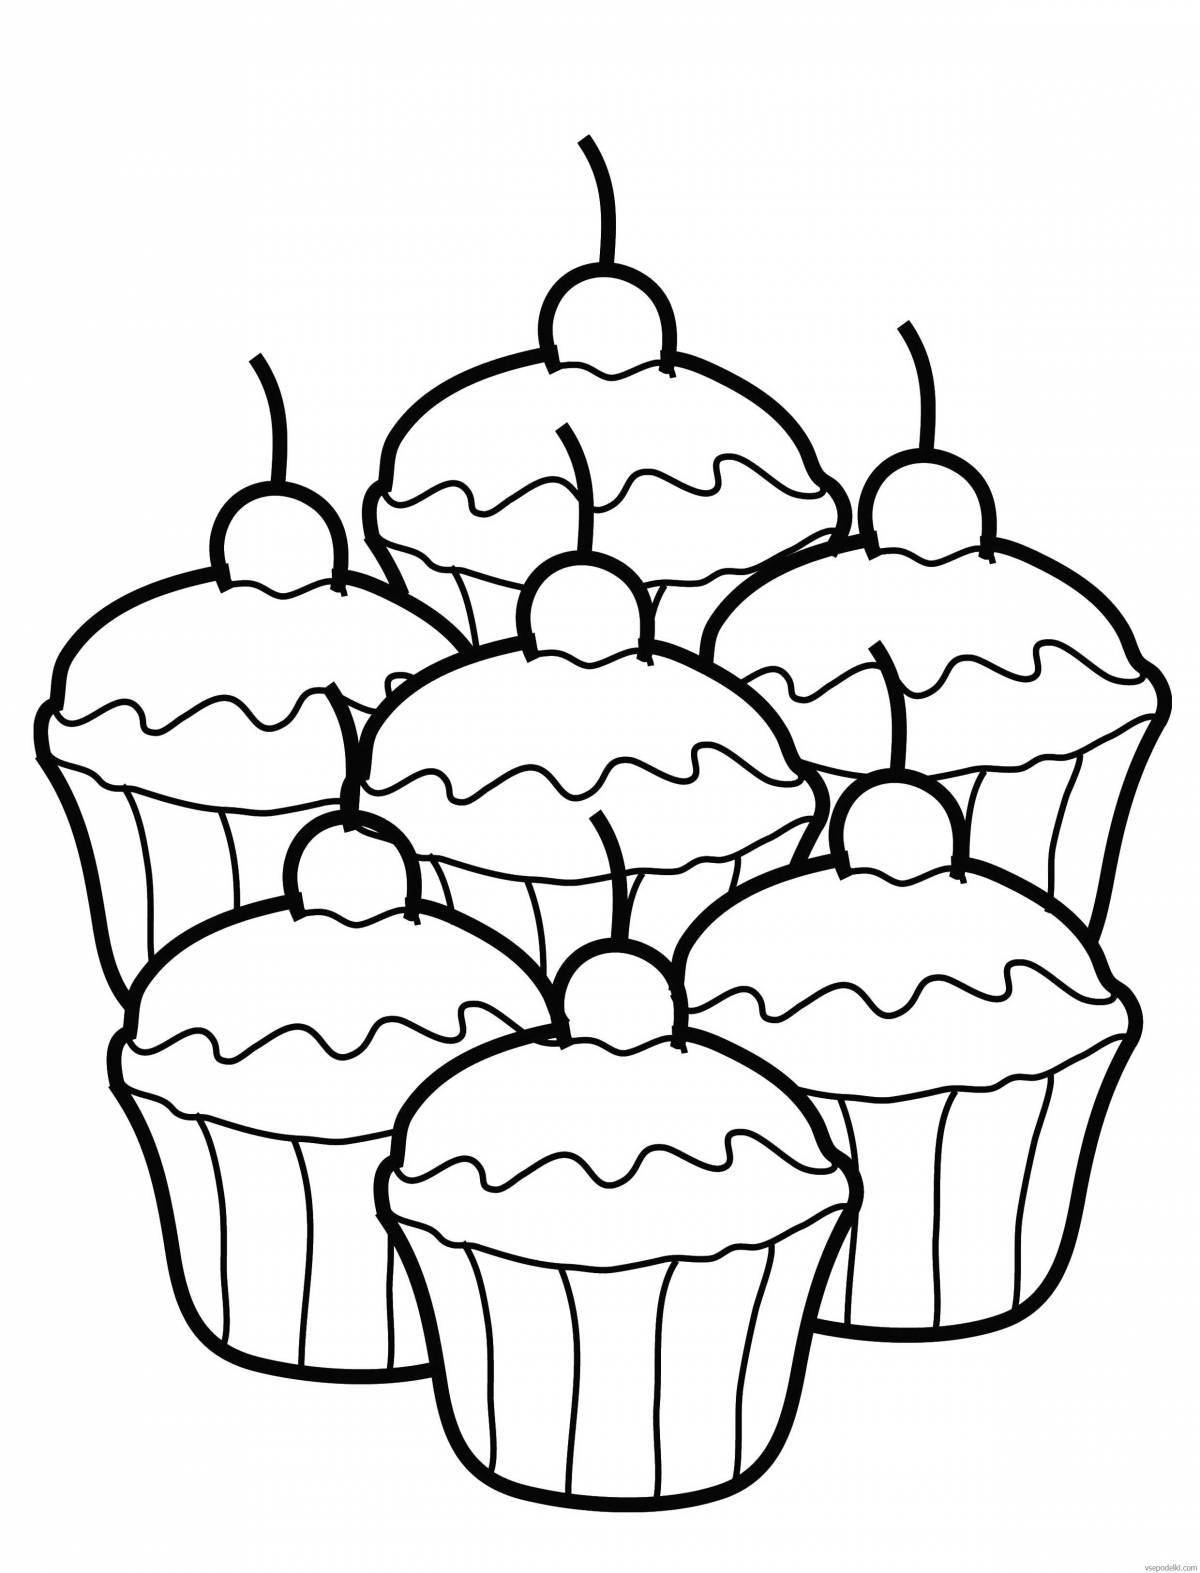 Colour Explosion Cupcake Coloring Pages for Kids